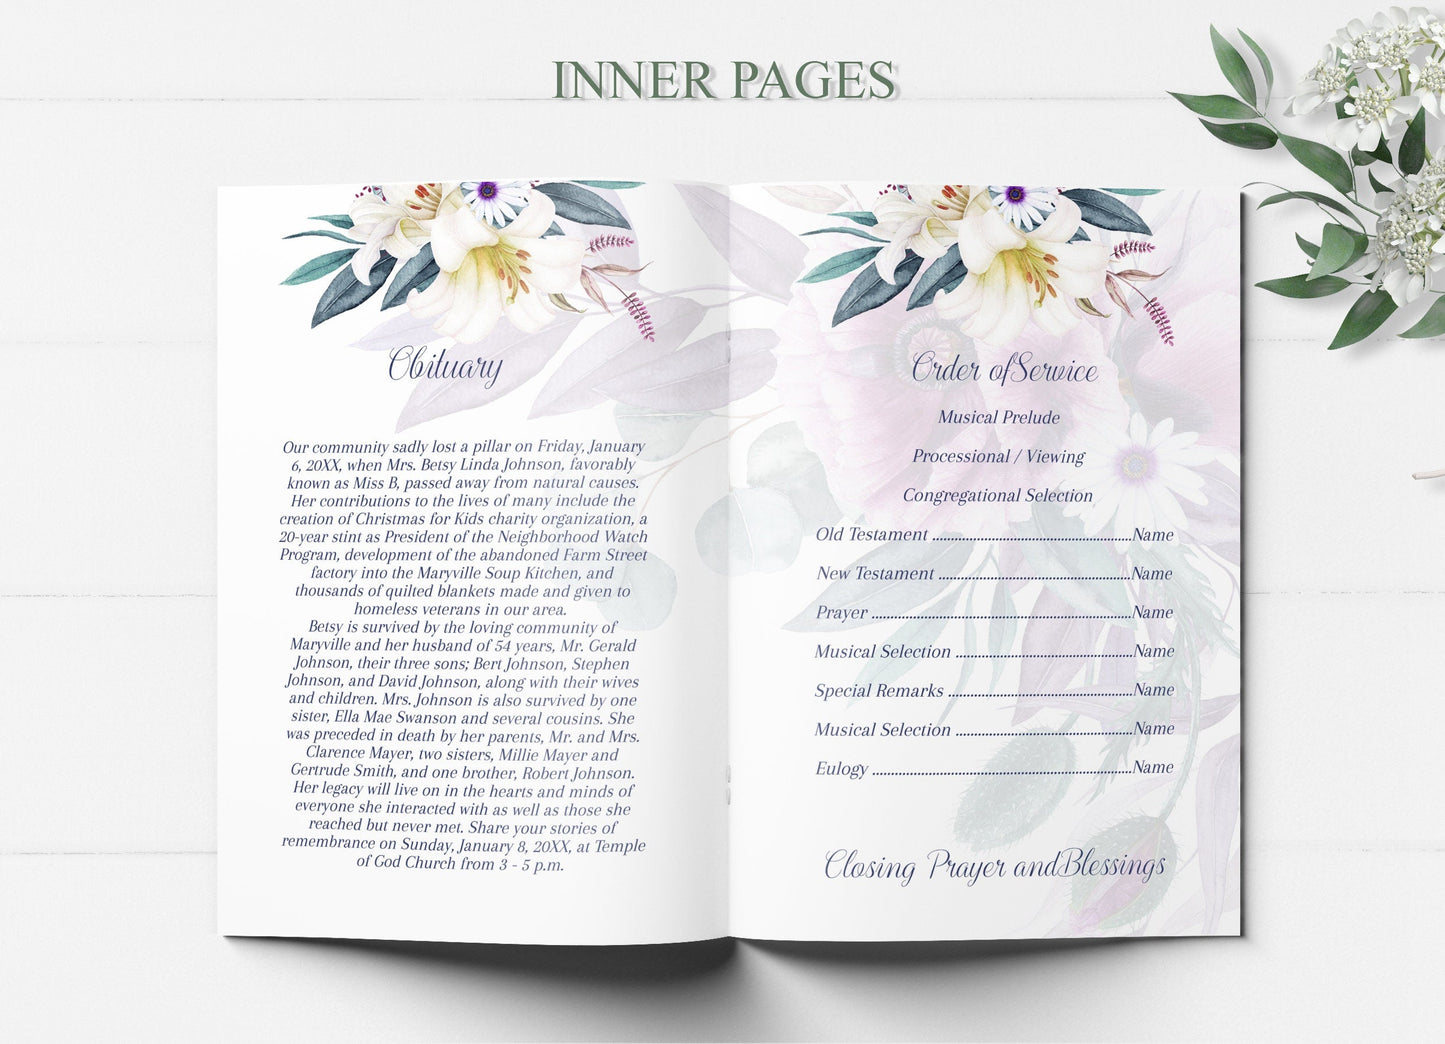 Obituary section of funeral program pamphlet template